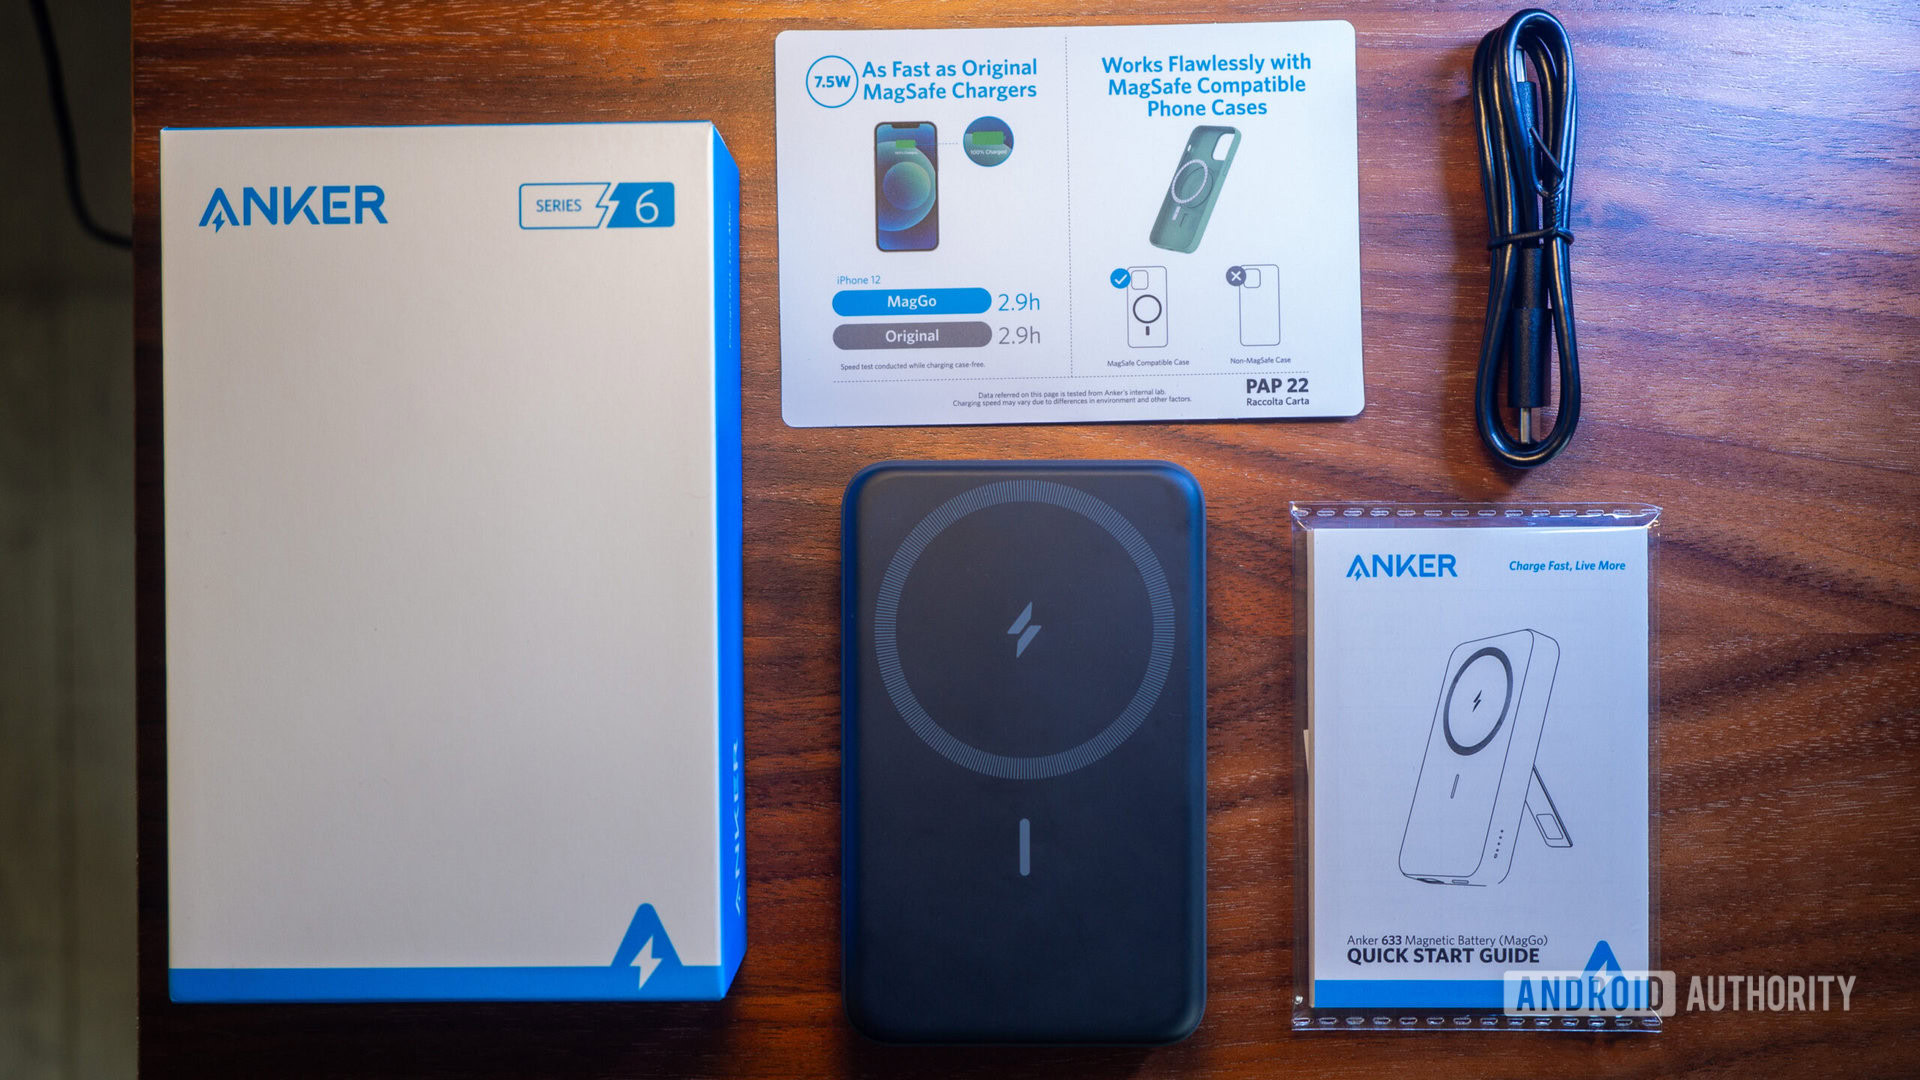 Anker 633 MagGo Review - The Perfect MagSafe Battery?